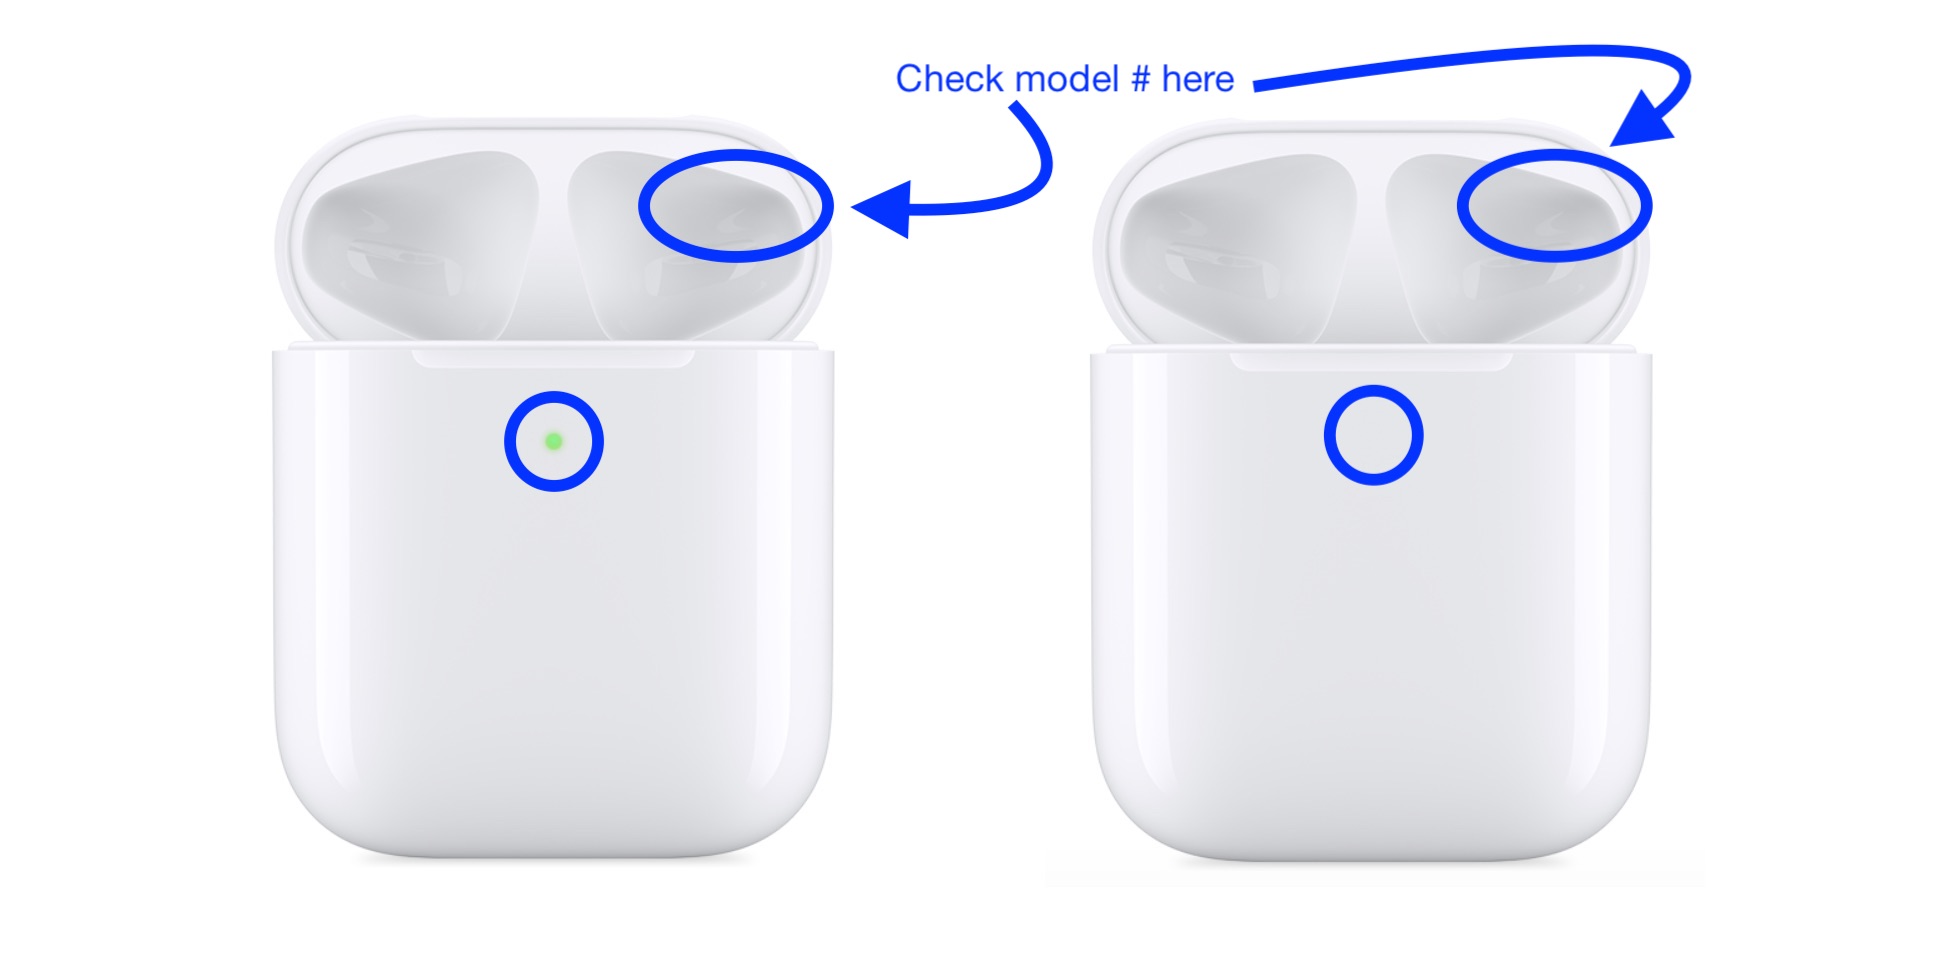 How to check the model of your AirPods charging case 9to5Mac